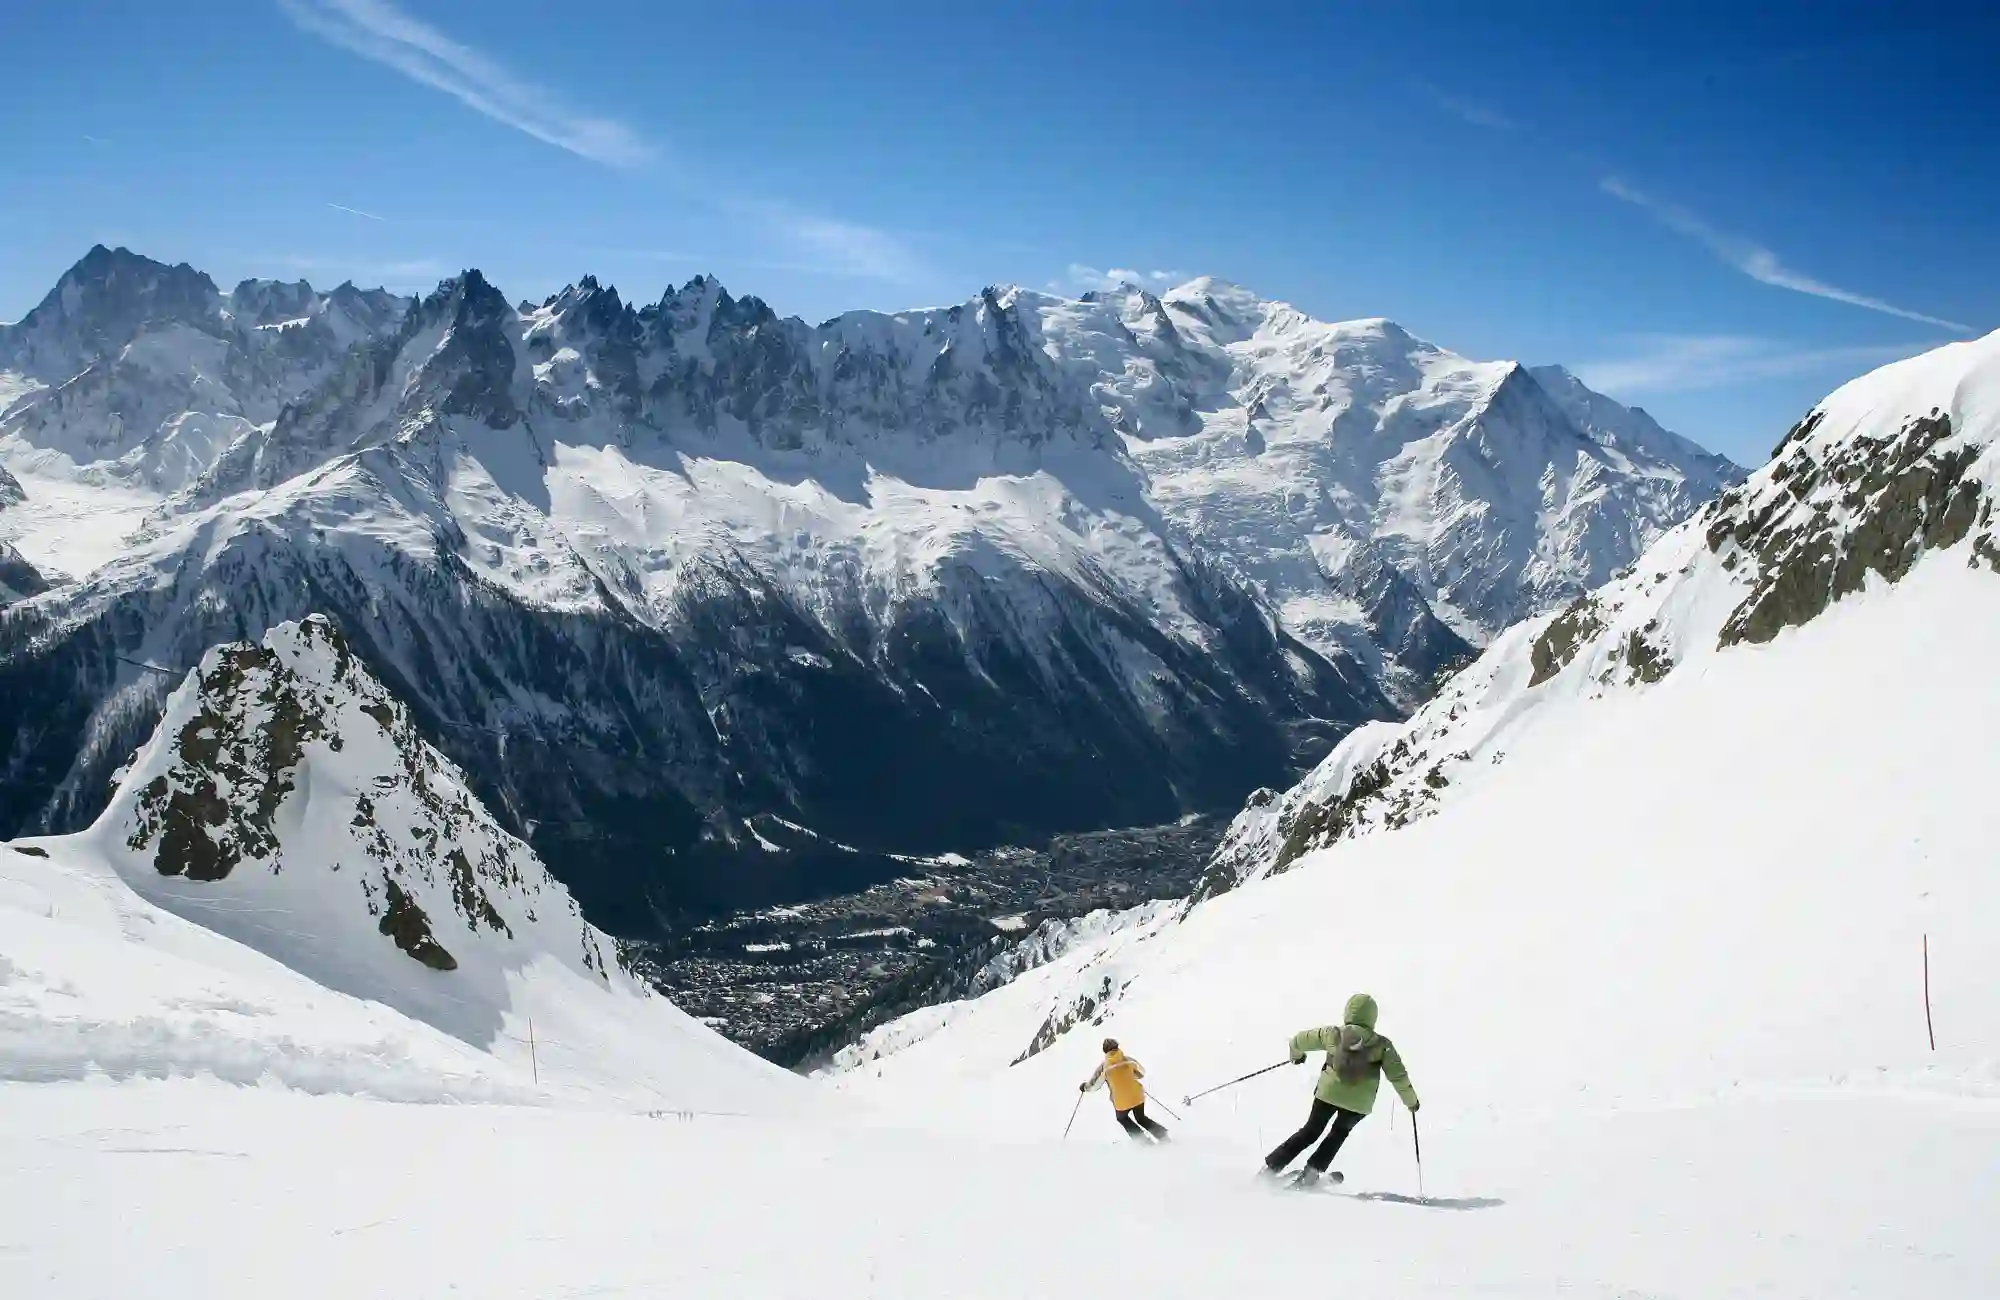 Skiing in the Alps - Mont Blanc